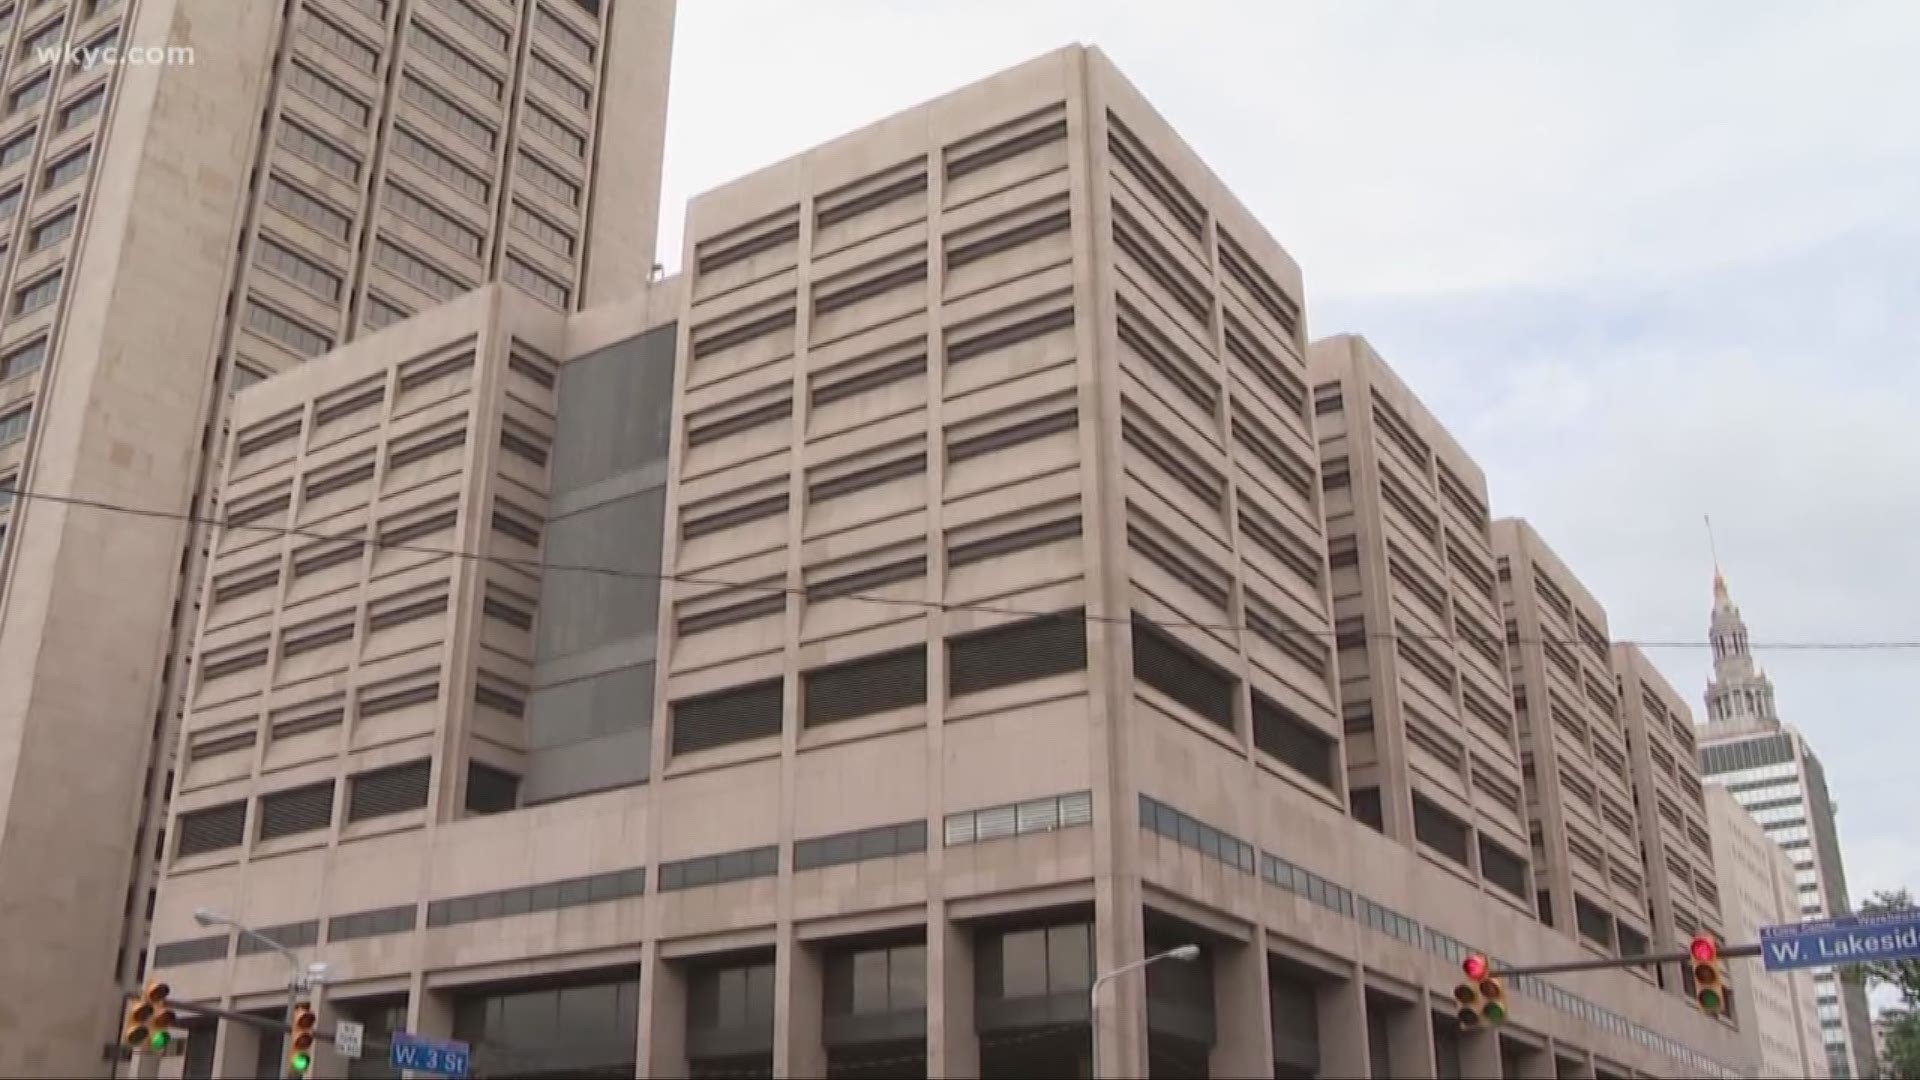 Cuyahoga County Jail receives scathing review following U.S. Marshals inspection